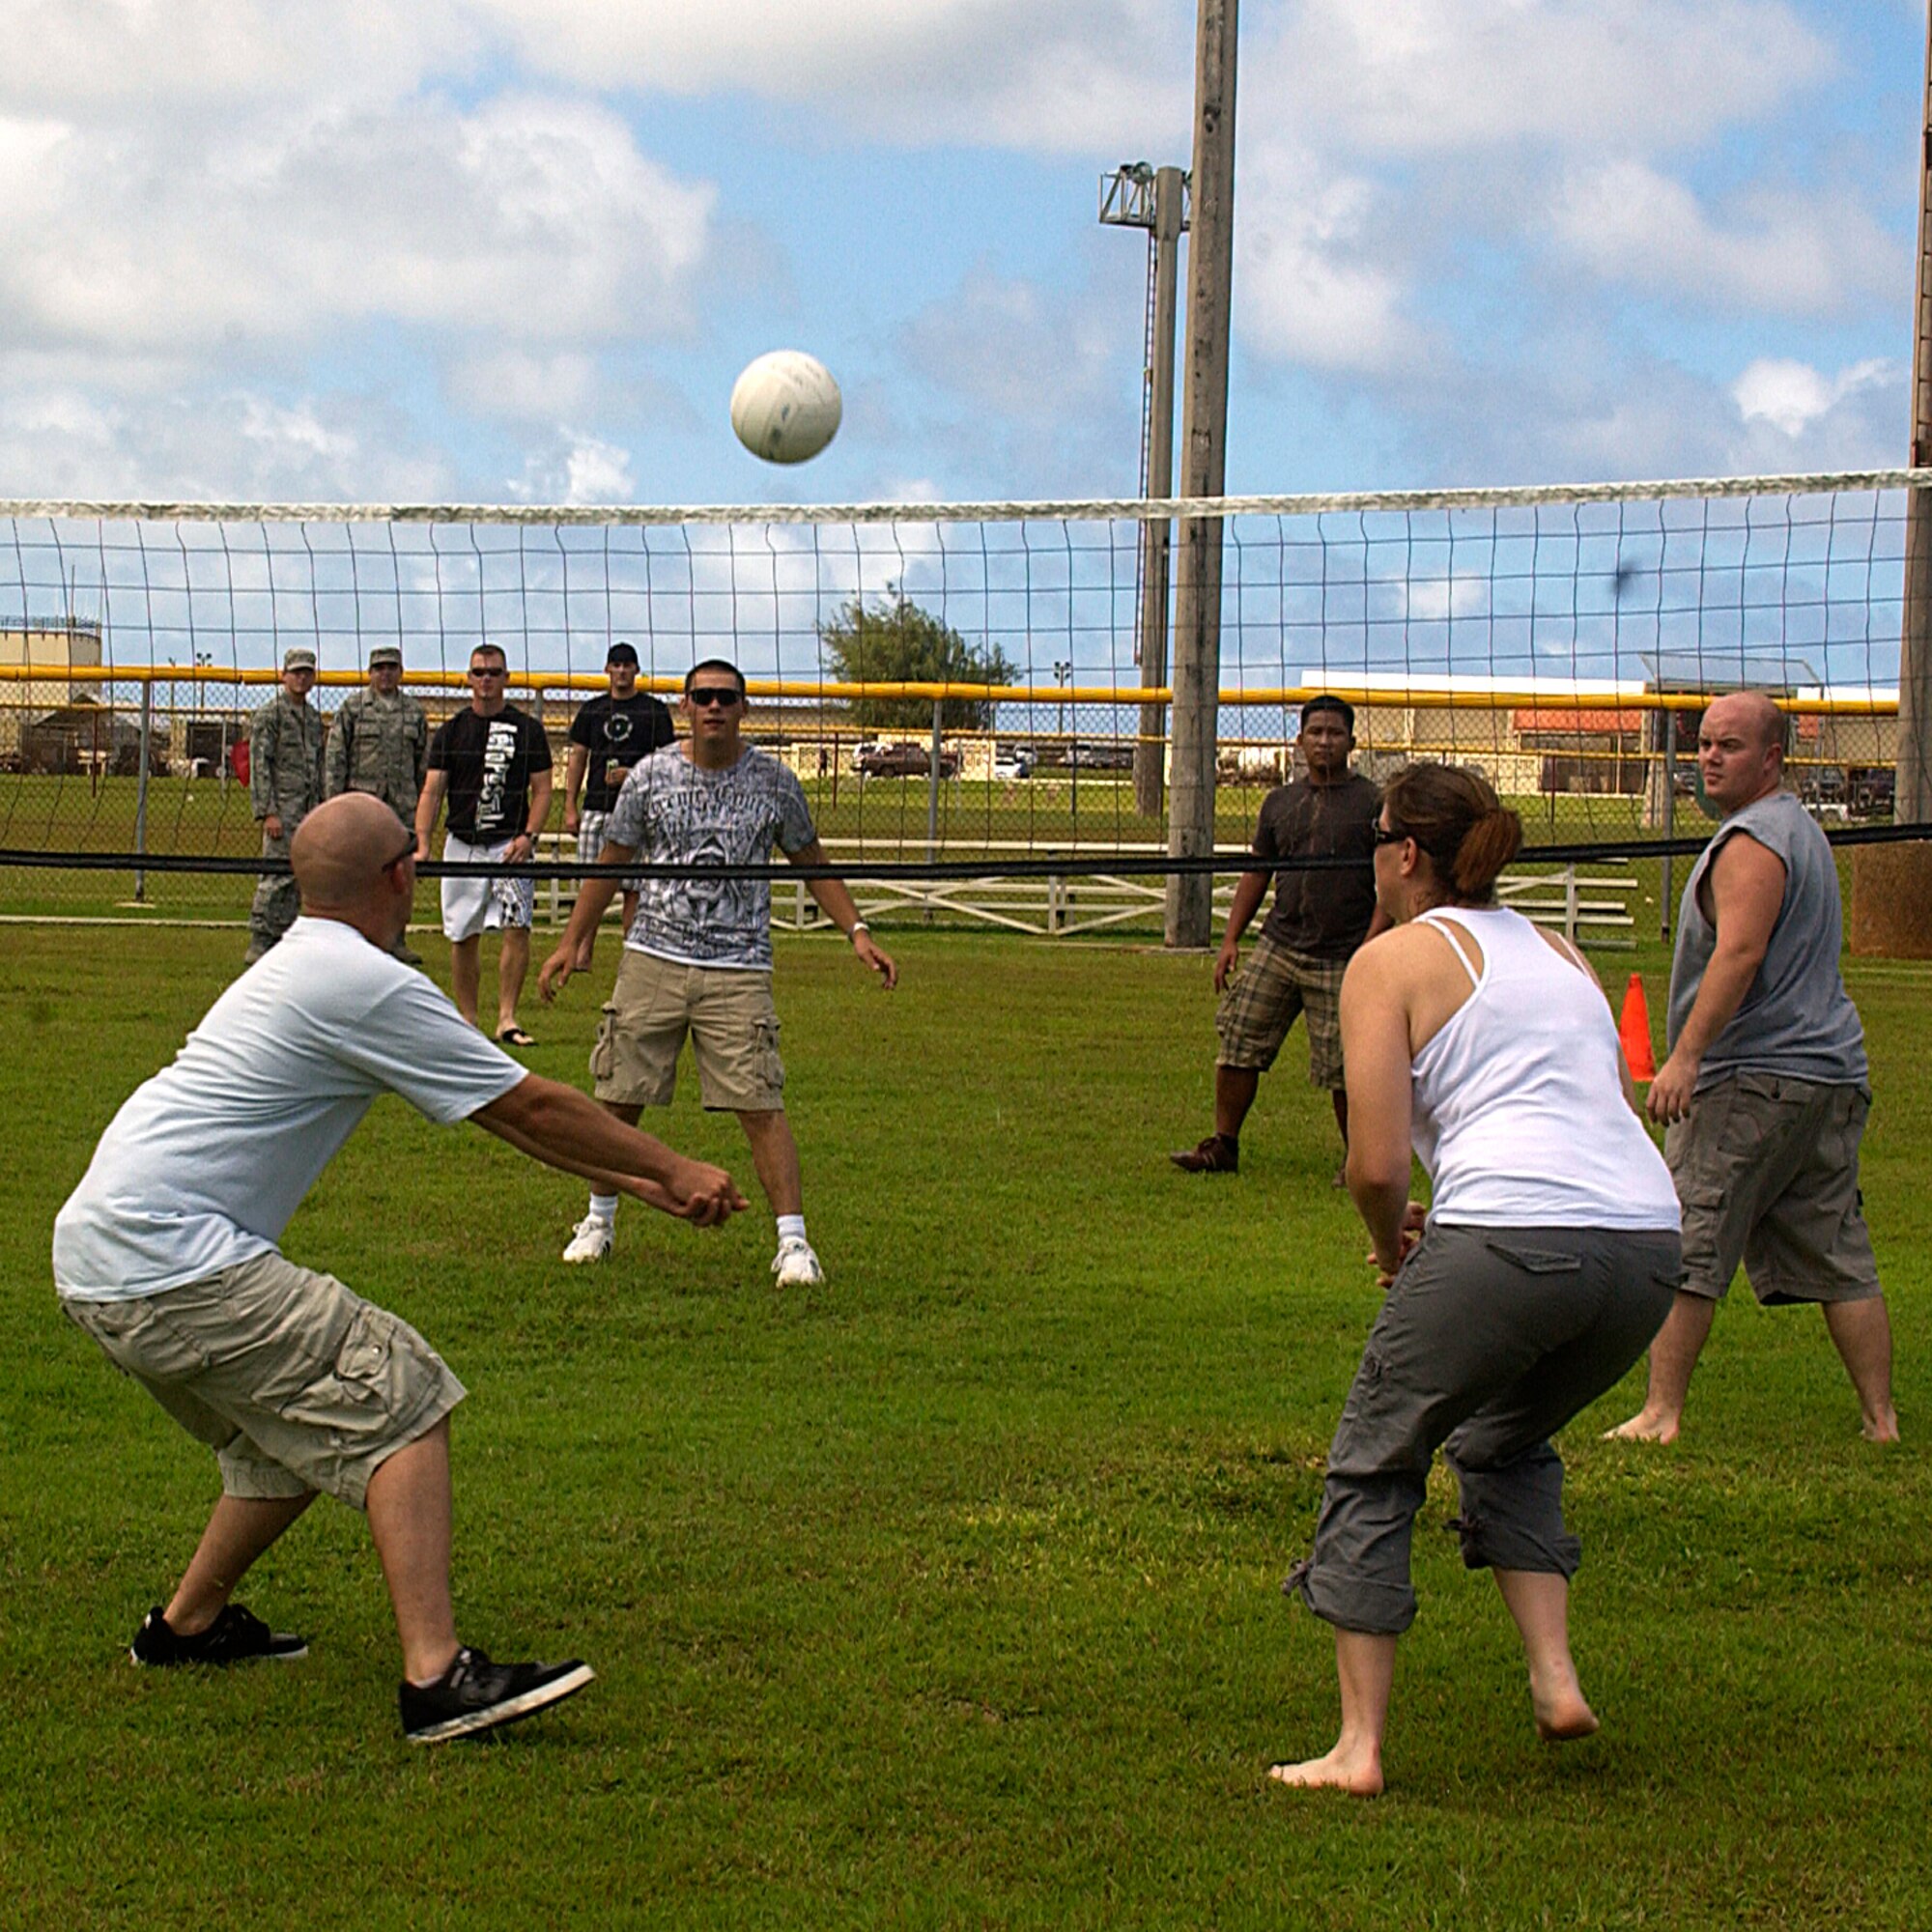 Staff Sgt. Brandon Williamson, 736th Security Forces Squadron gets ready to volley the ball across the net during a game of volleyball at the Junior Enlisted Appreciation Day event held here Oct. 24. (U.S. Air Force photo by Airman 1st Class Carissa Wolff)                                                       